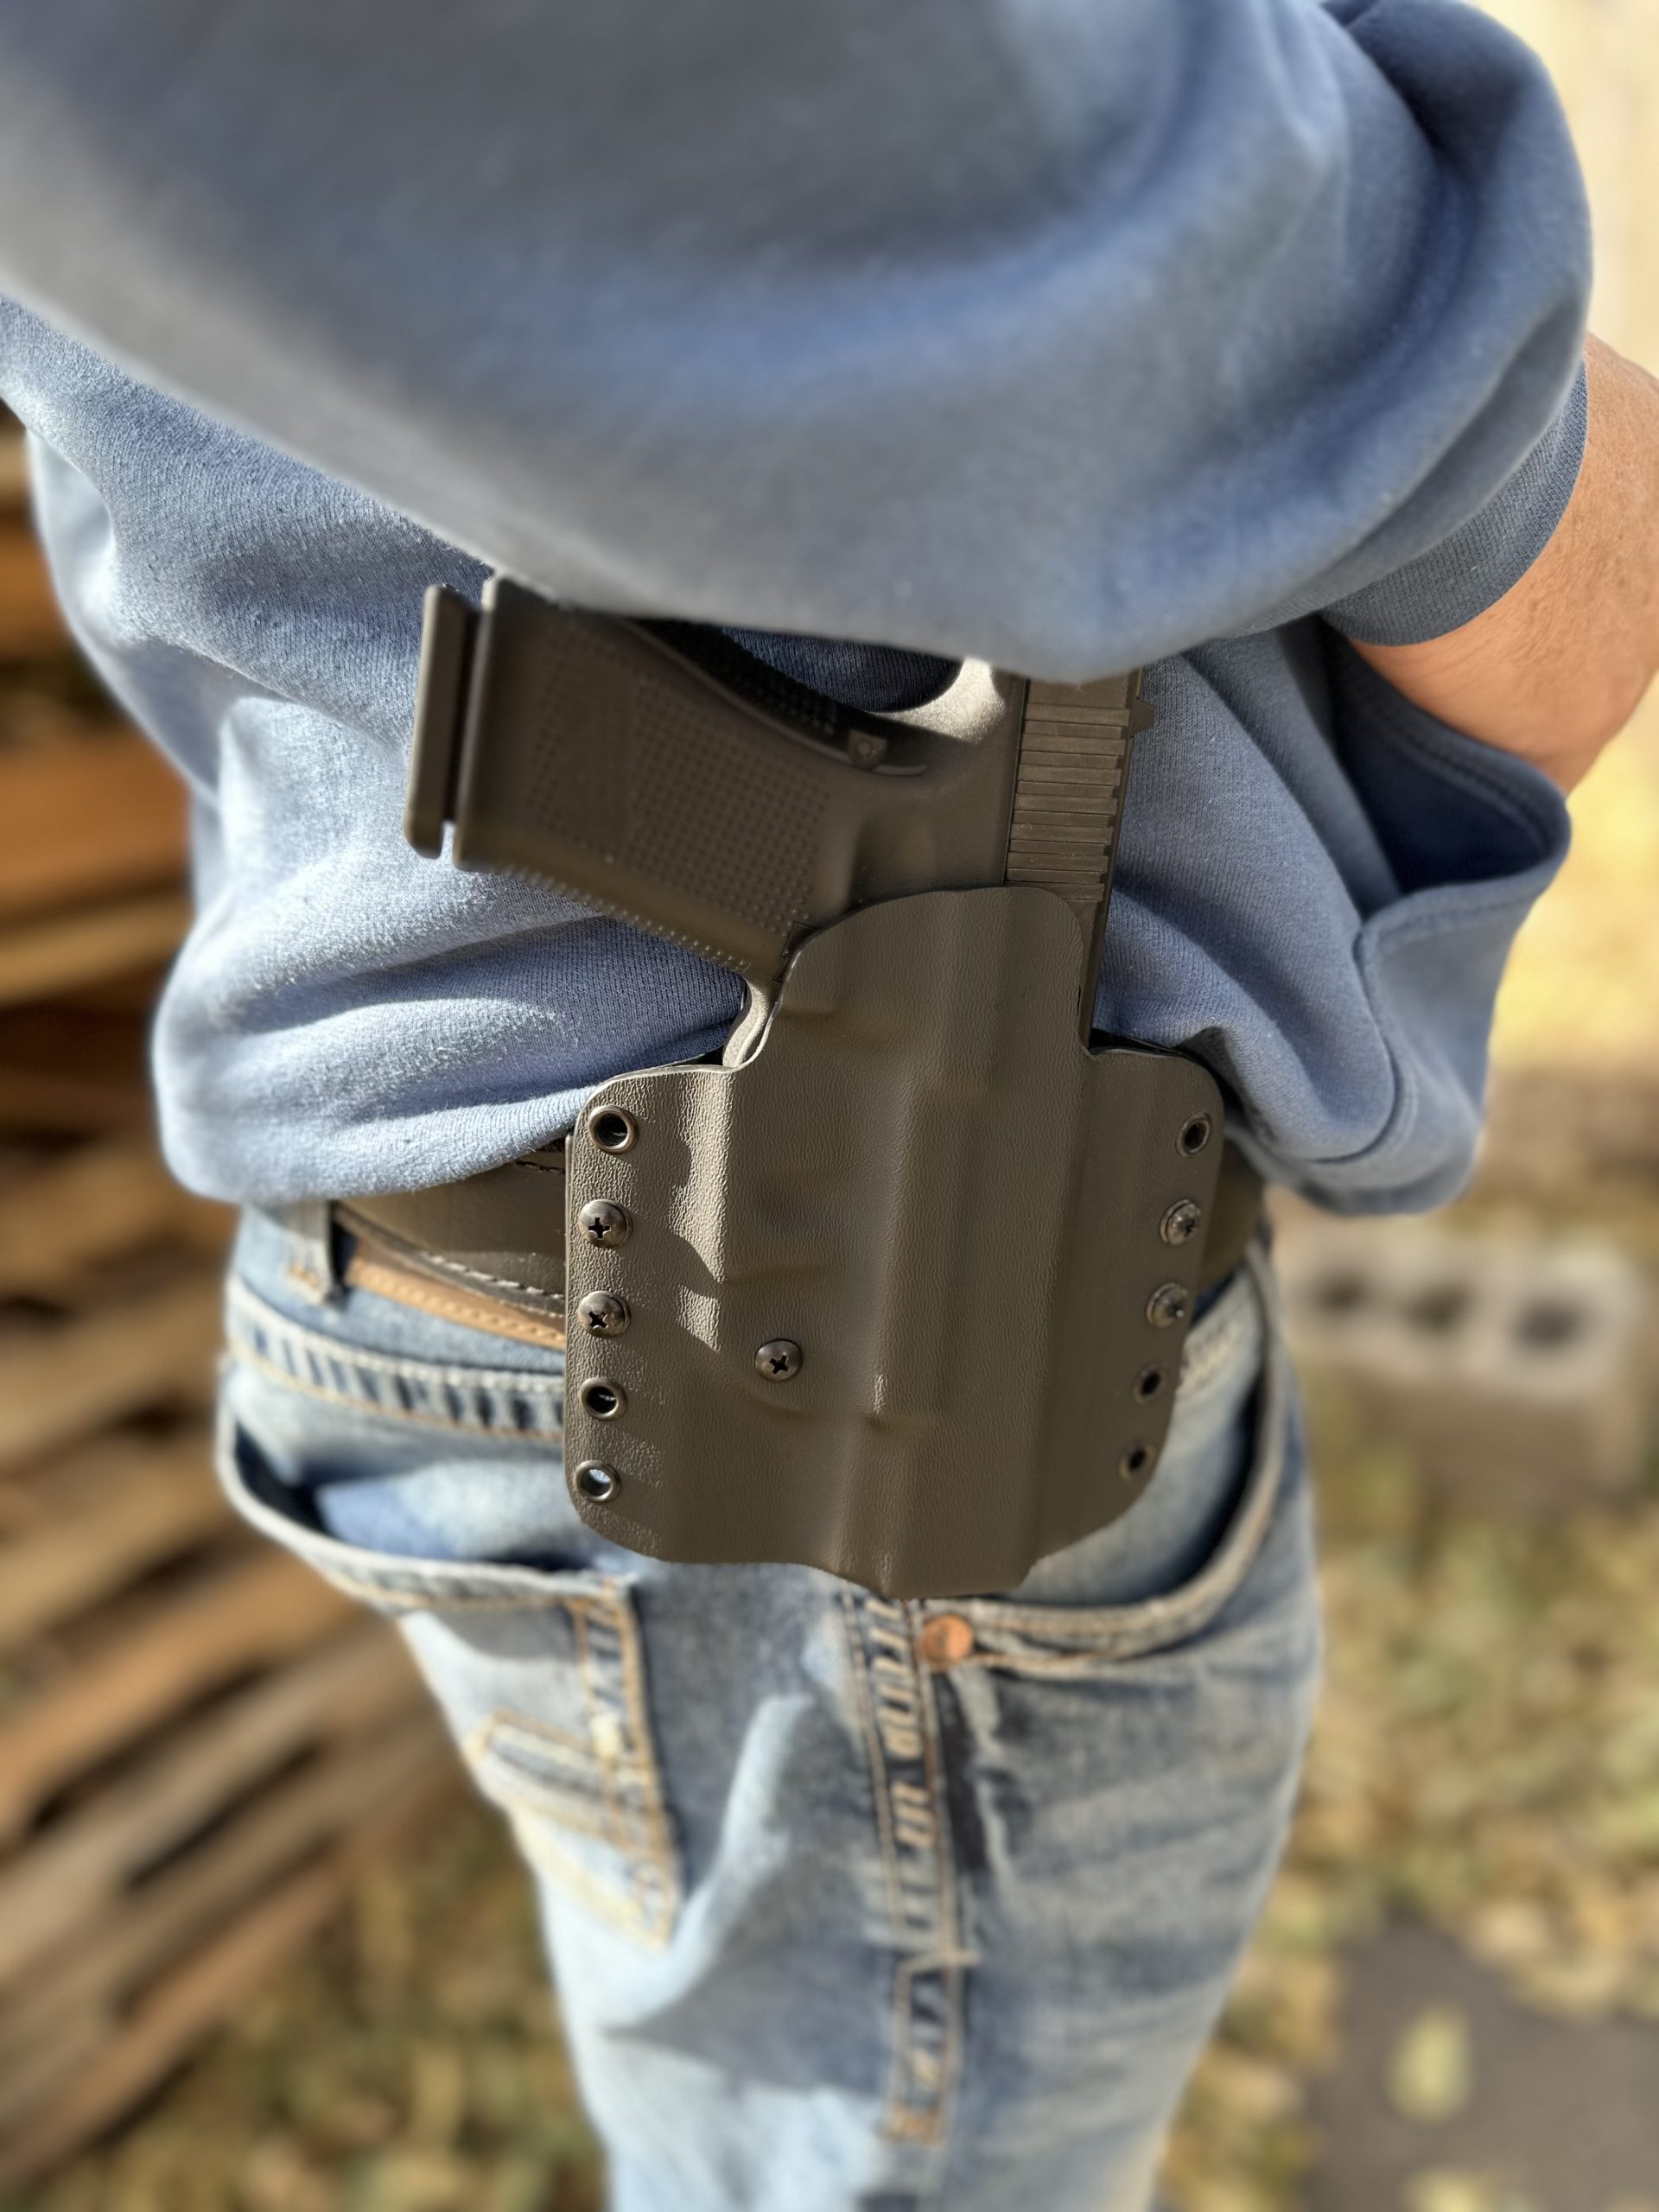 Perfect fit custom made gun holsters for wide range of gun types